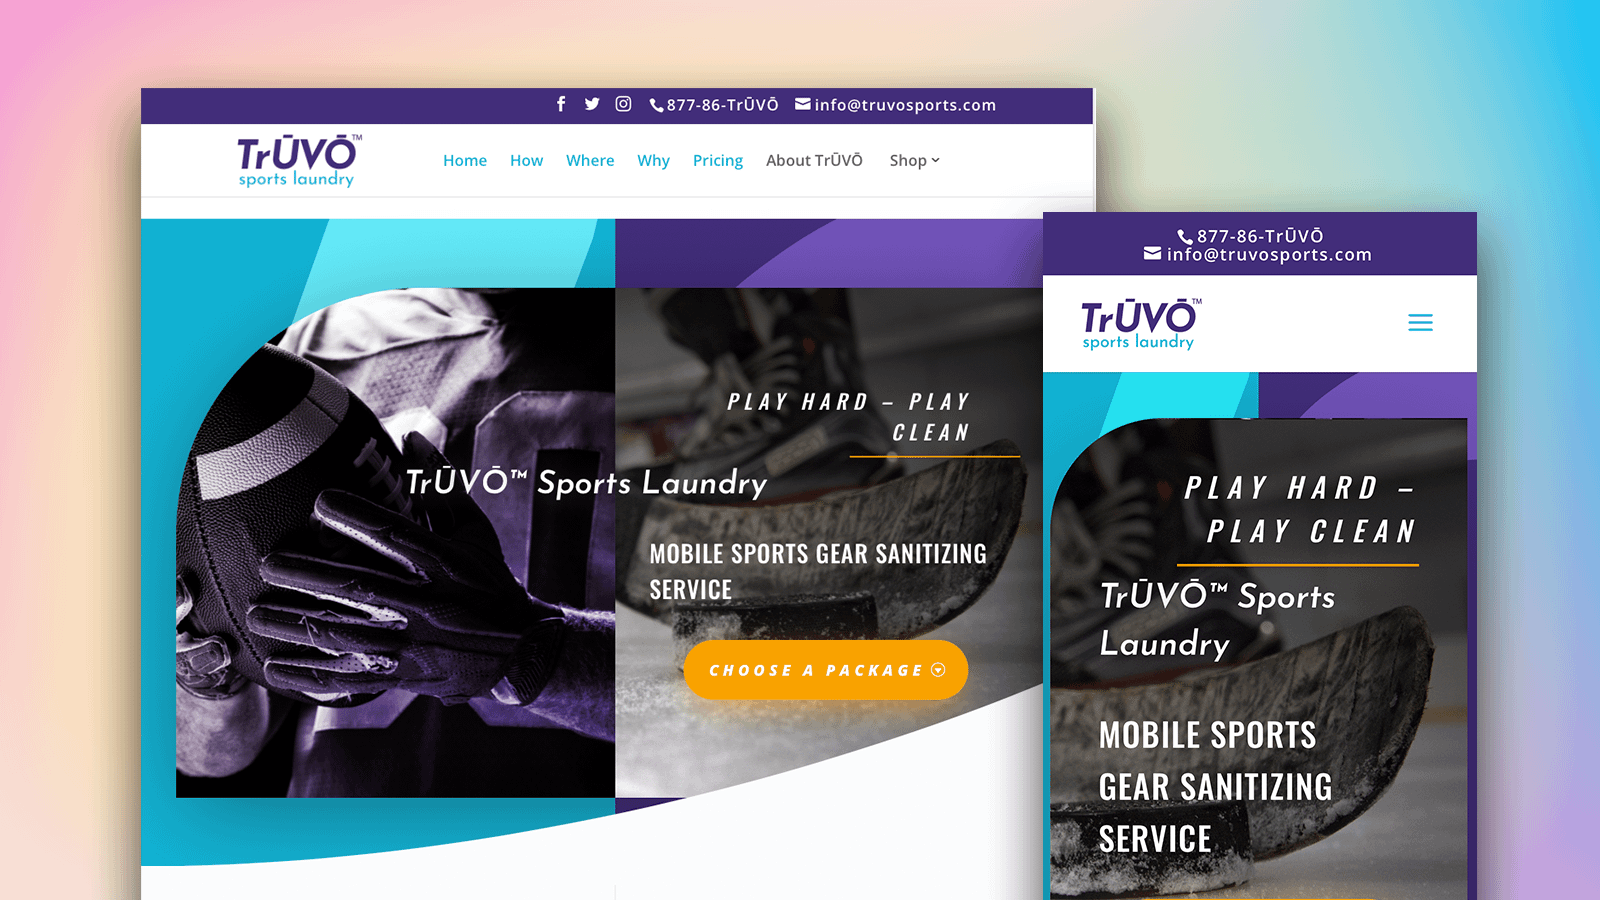 TruVo Sports Laundry Website on Desktop and Mobile